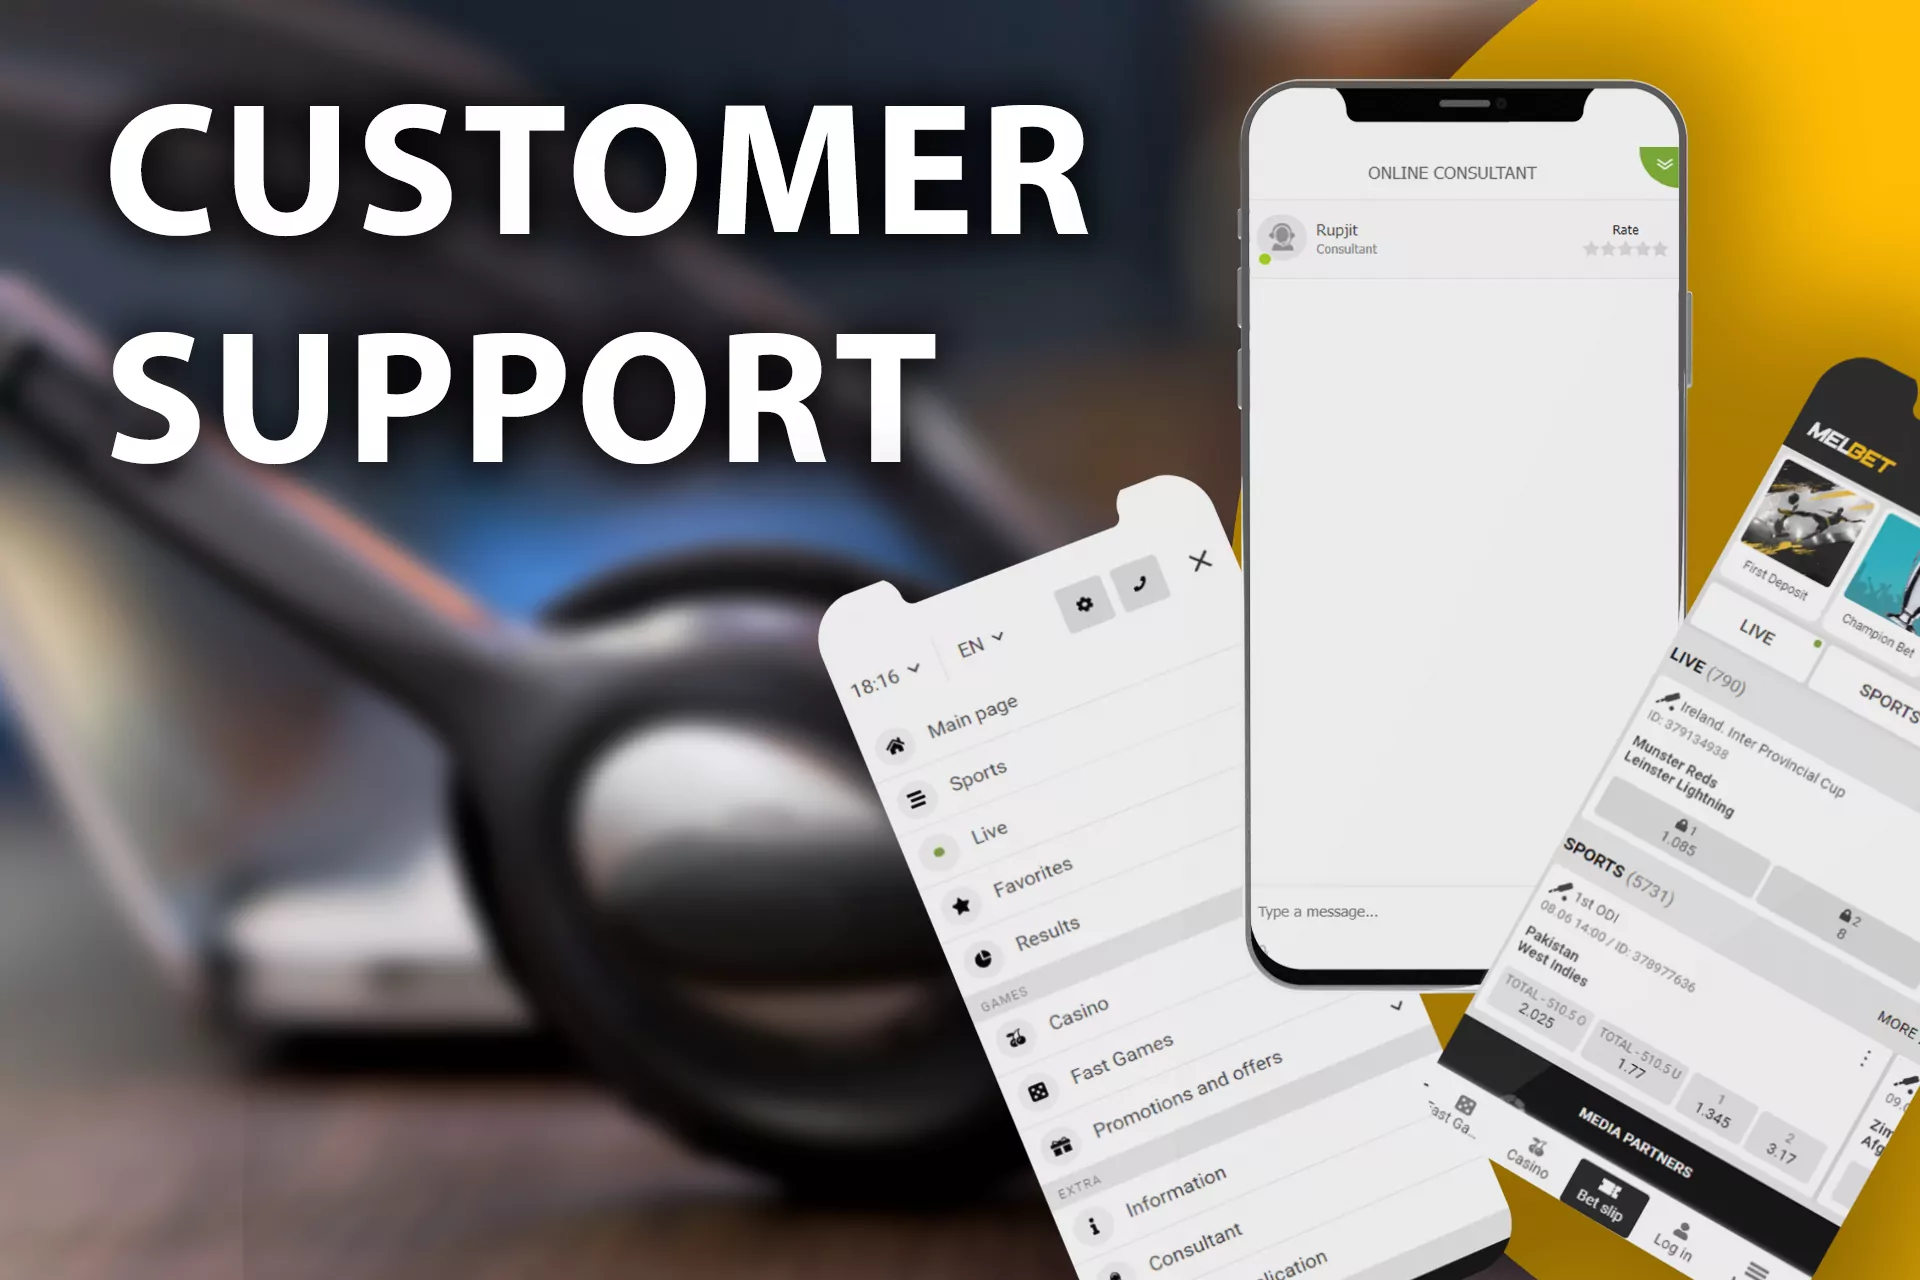 You can contact customer service team in the Melbet app.